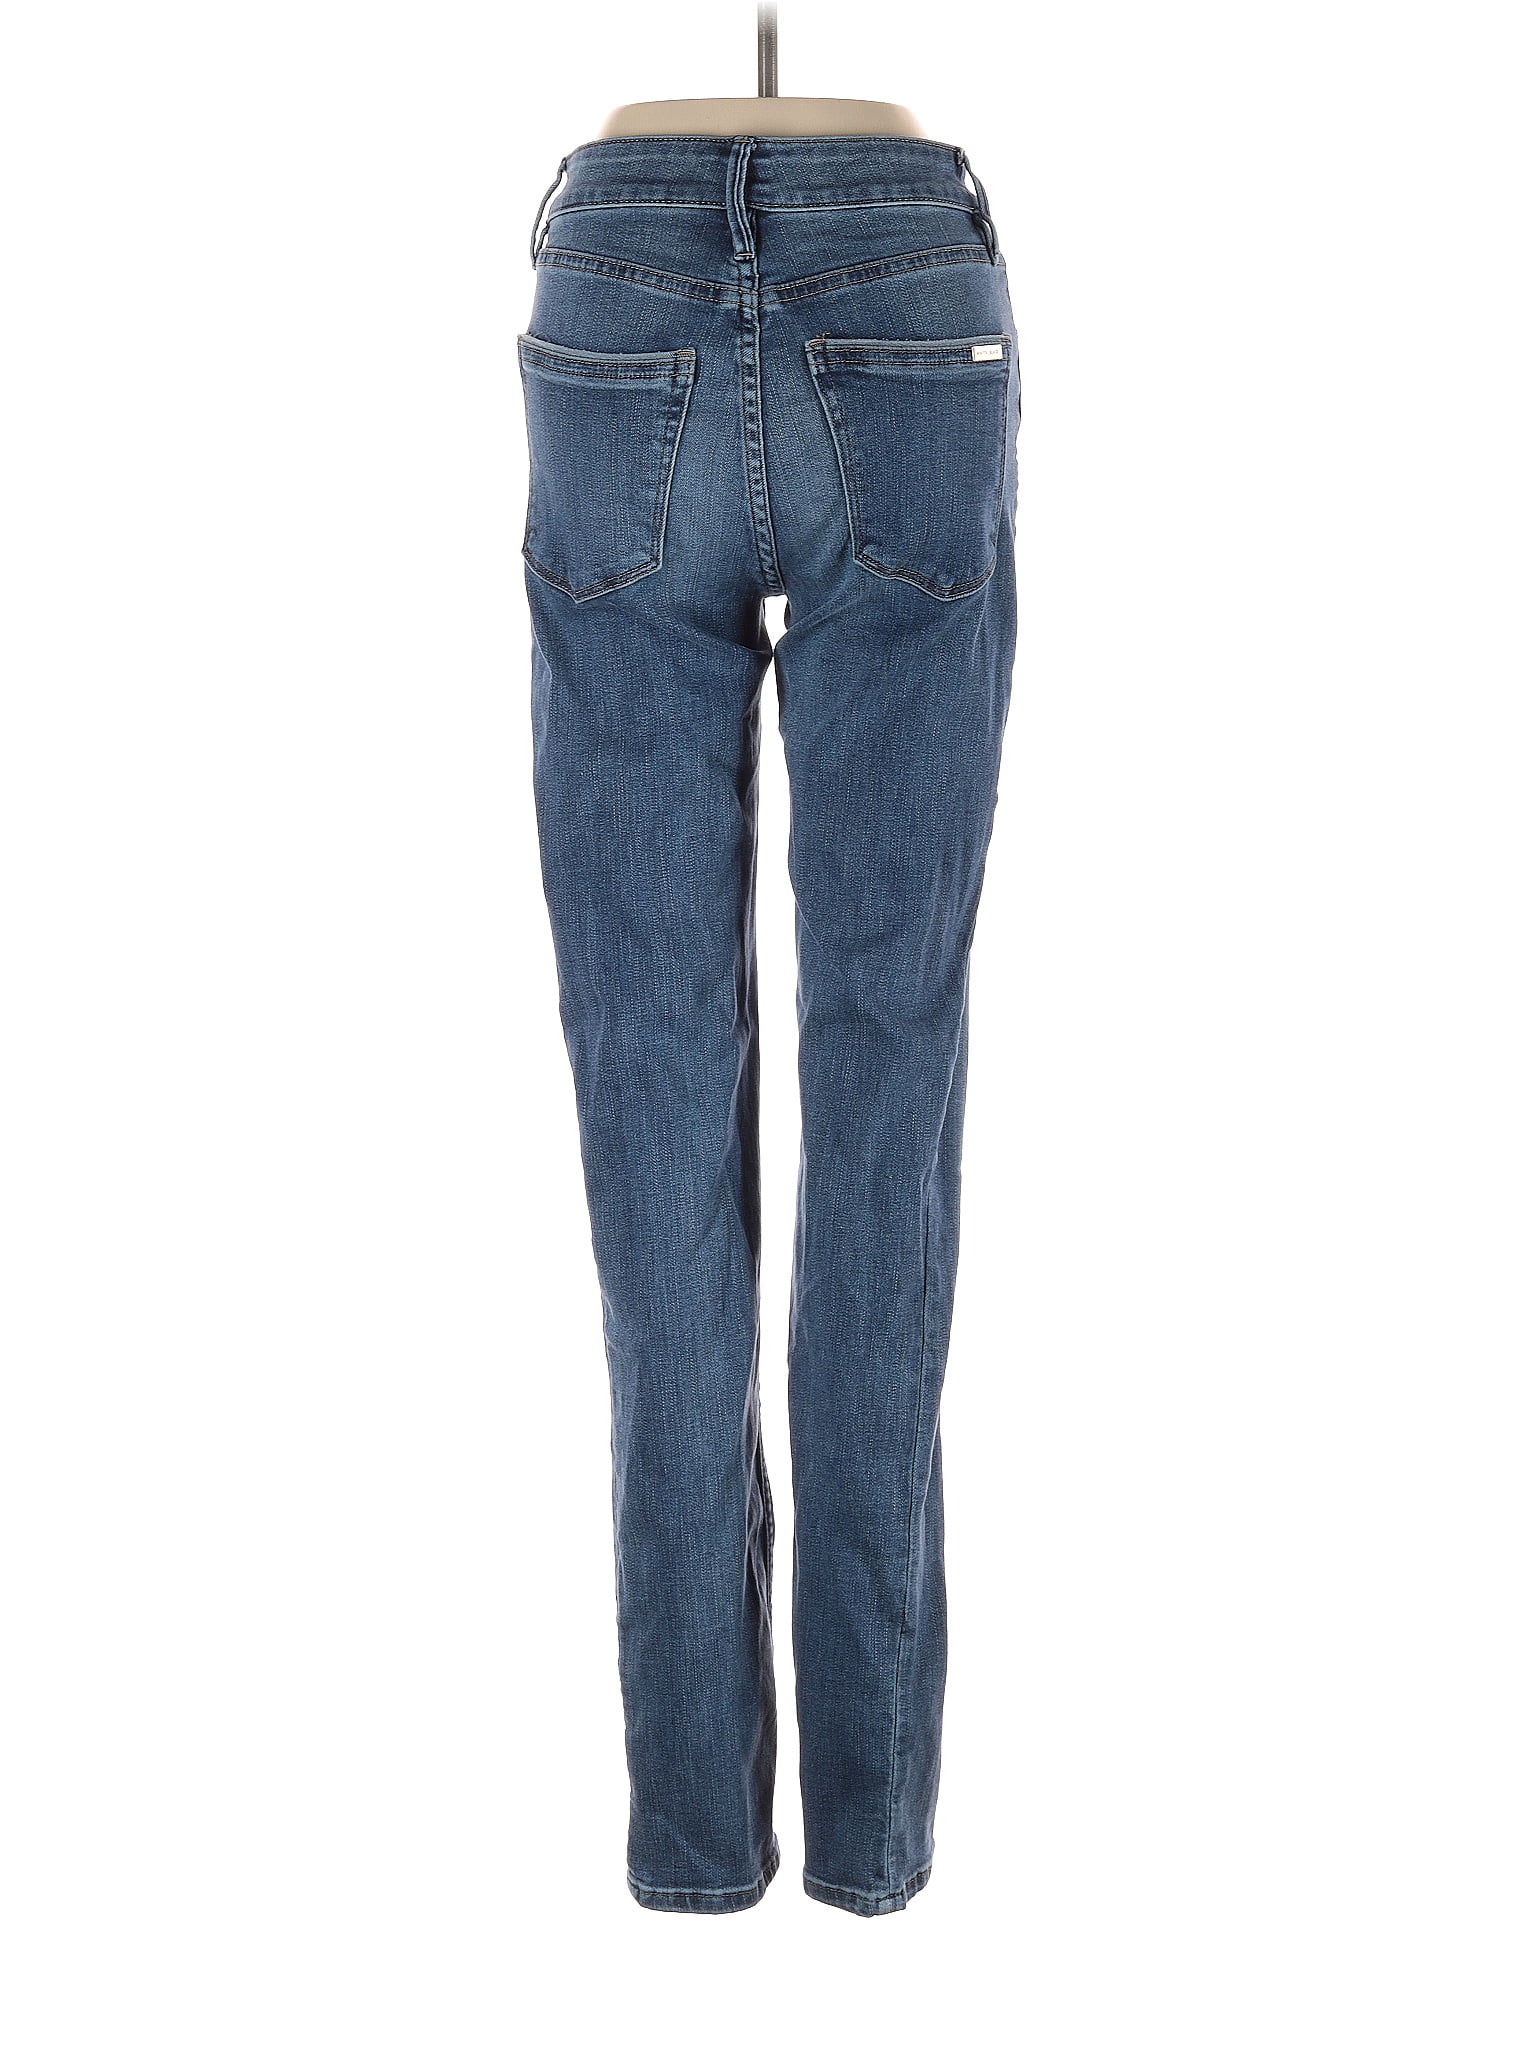 White House Black Market Solid Blue Jeans Size 00 (Tall) - 72% off